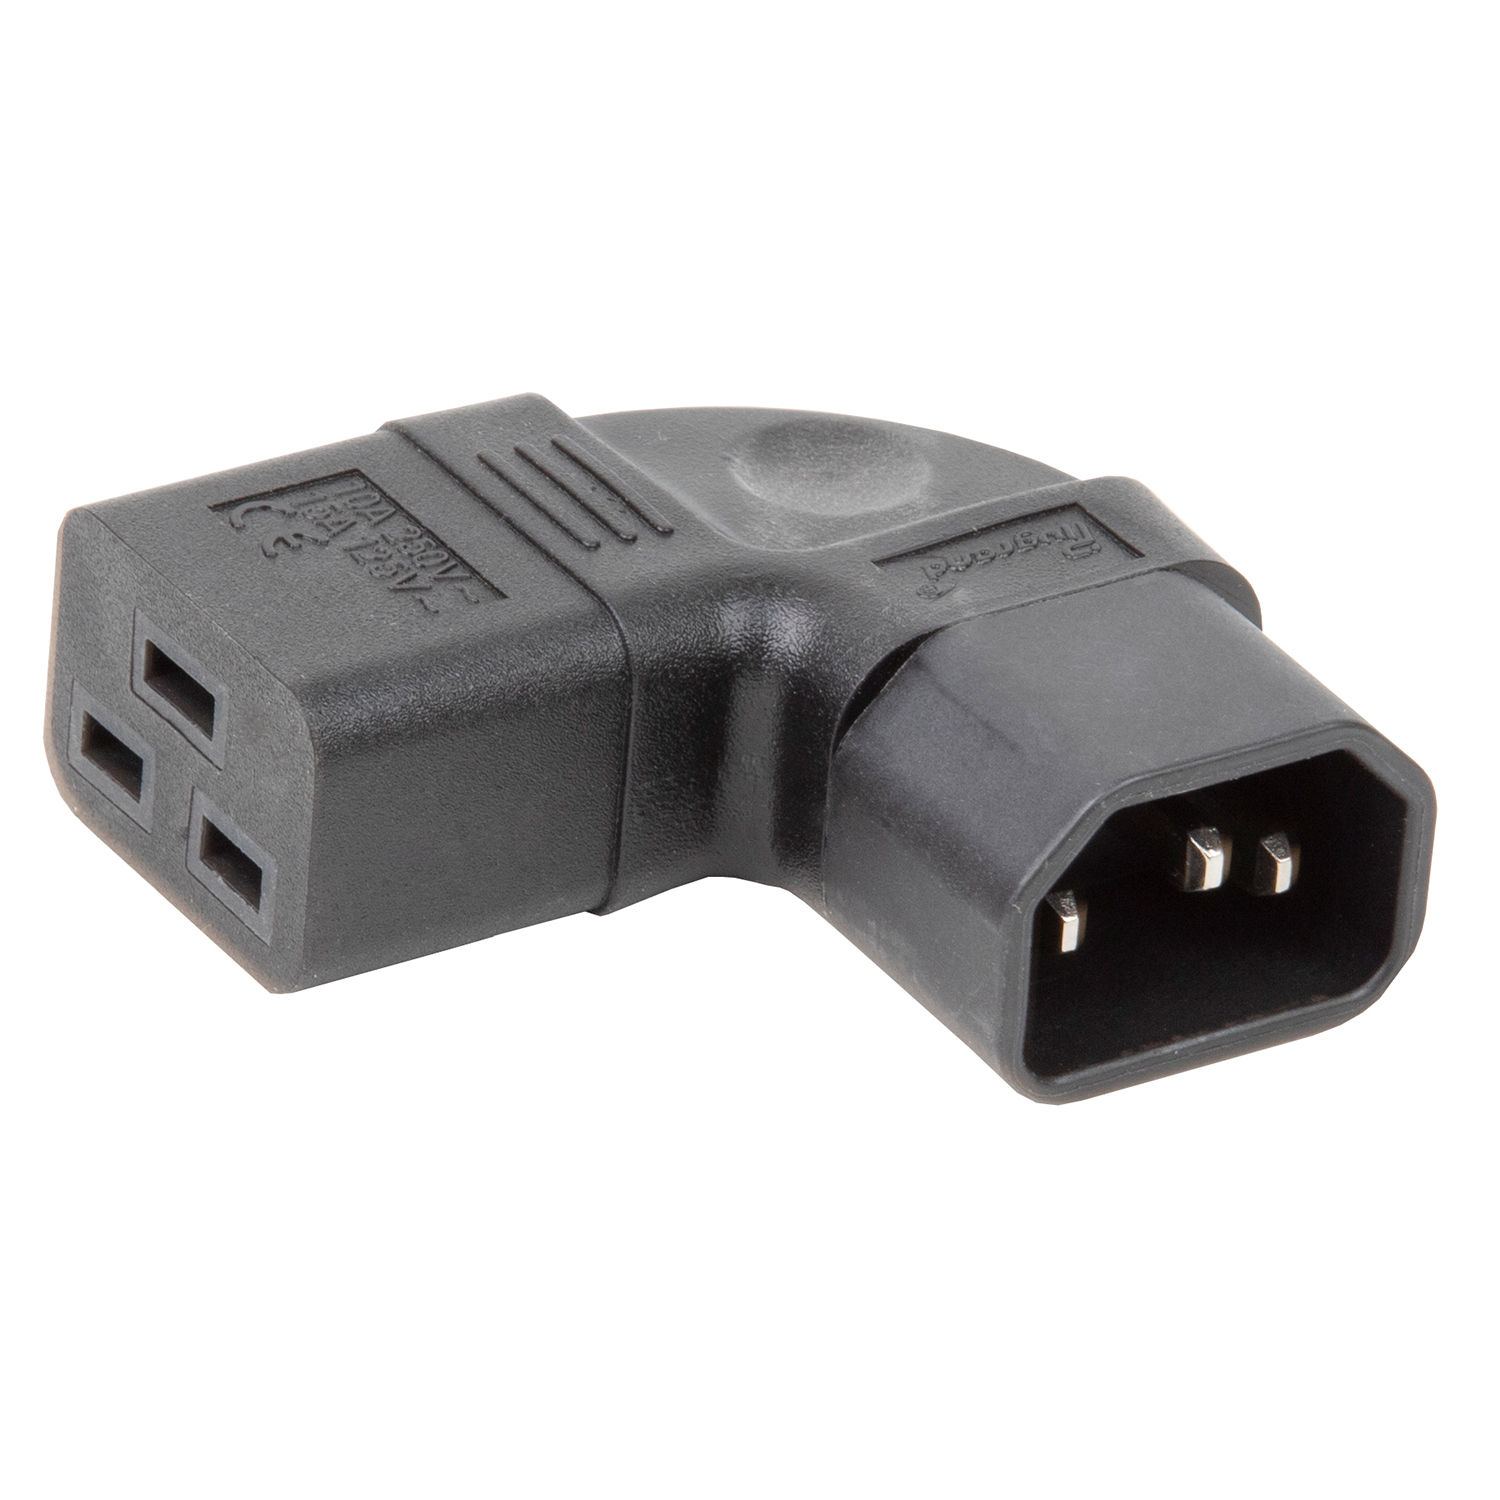 PA-0351 IEC C14 to C19 Left Angled AC Power Adapter,